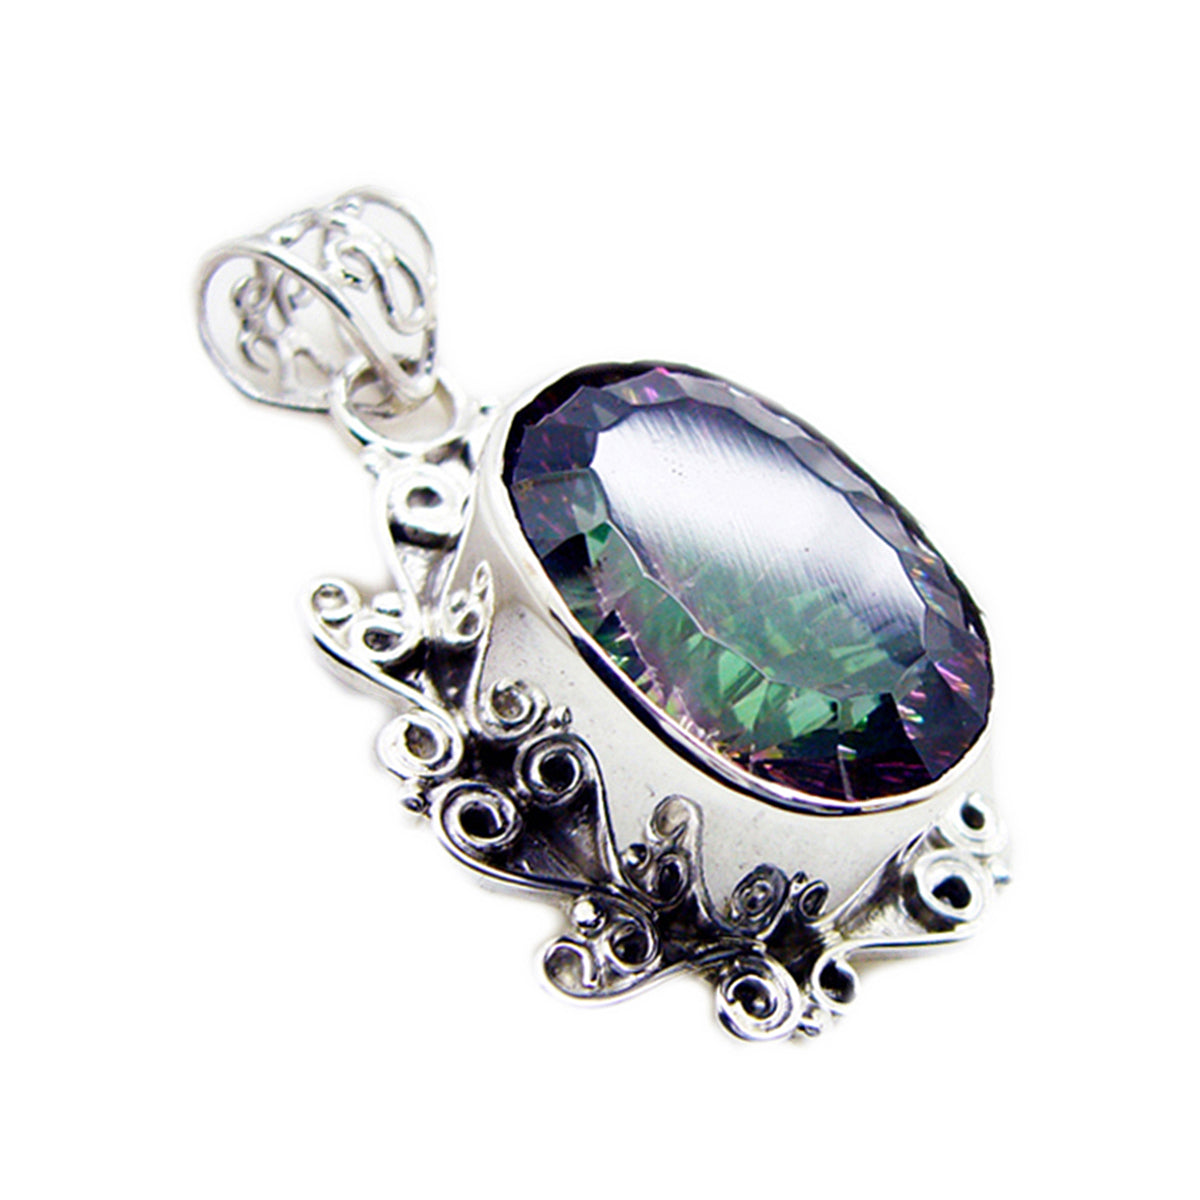 Riyo Exquisite Gems Oval Faceted Multi Color Mystic Quartz Silver Pendant Gift For Wife